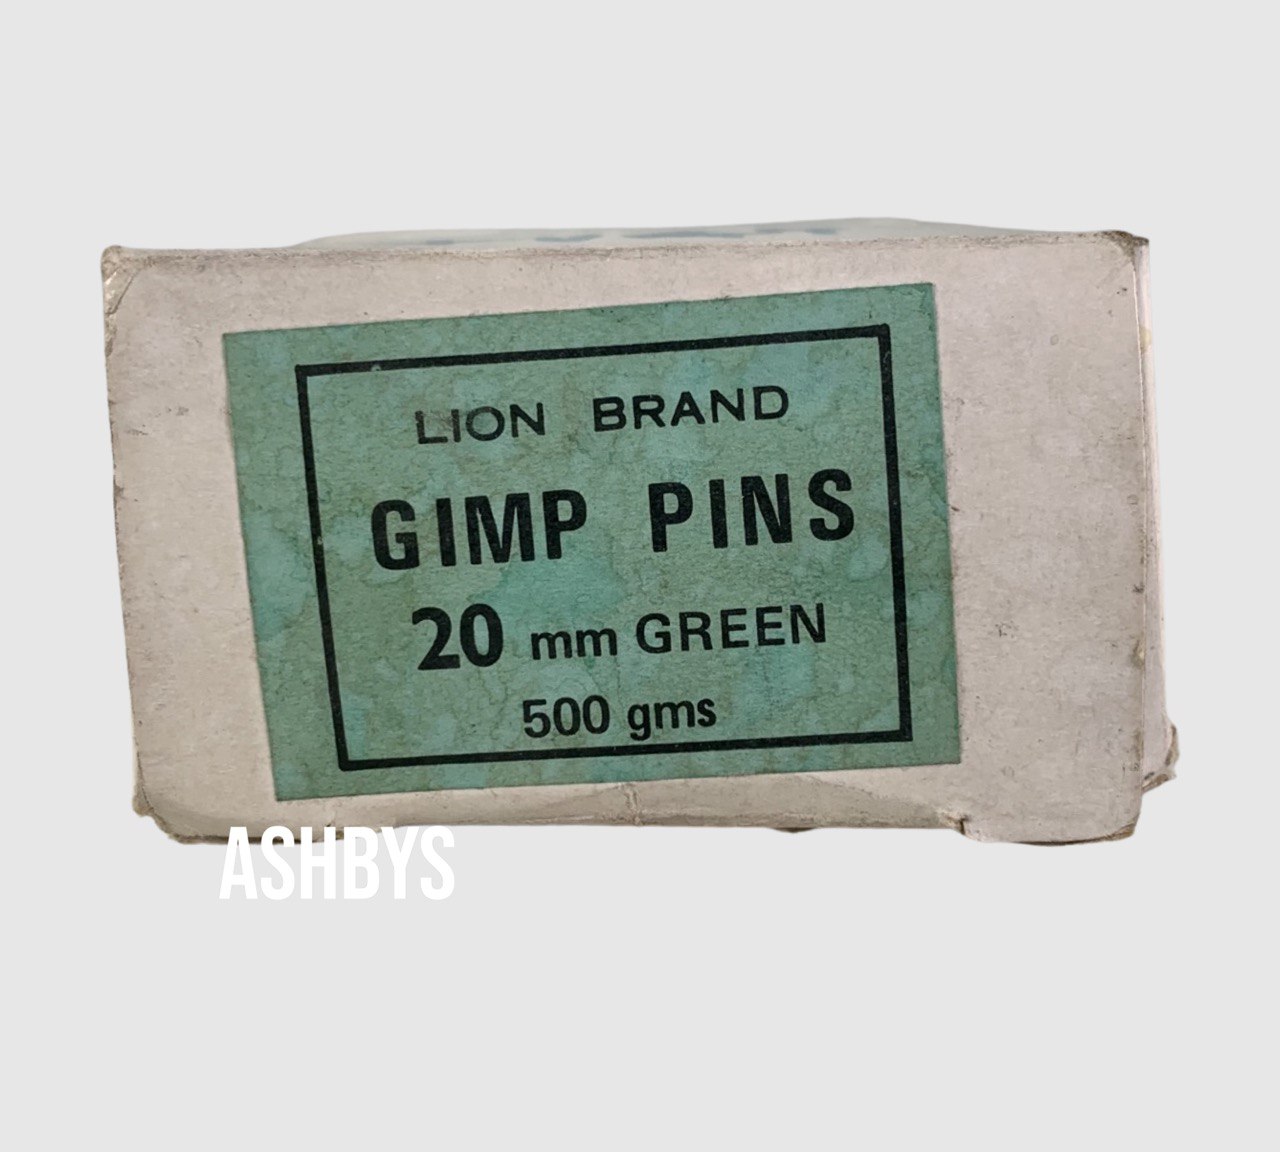 Lion Brand GREEN 20mm Gimp Pins 500gms (NEW UNUSED OLD STOCK)